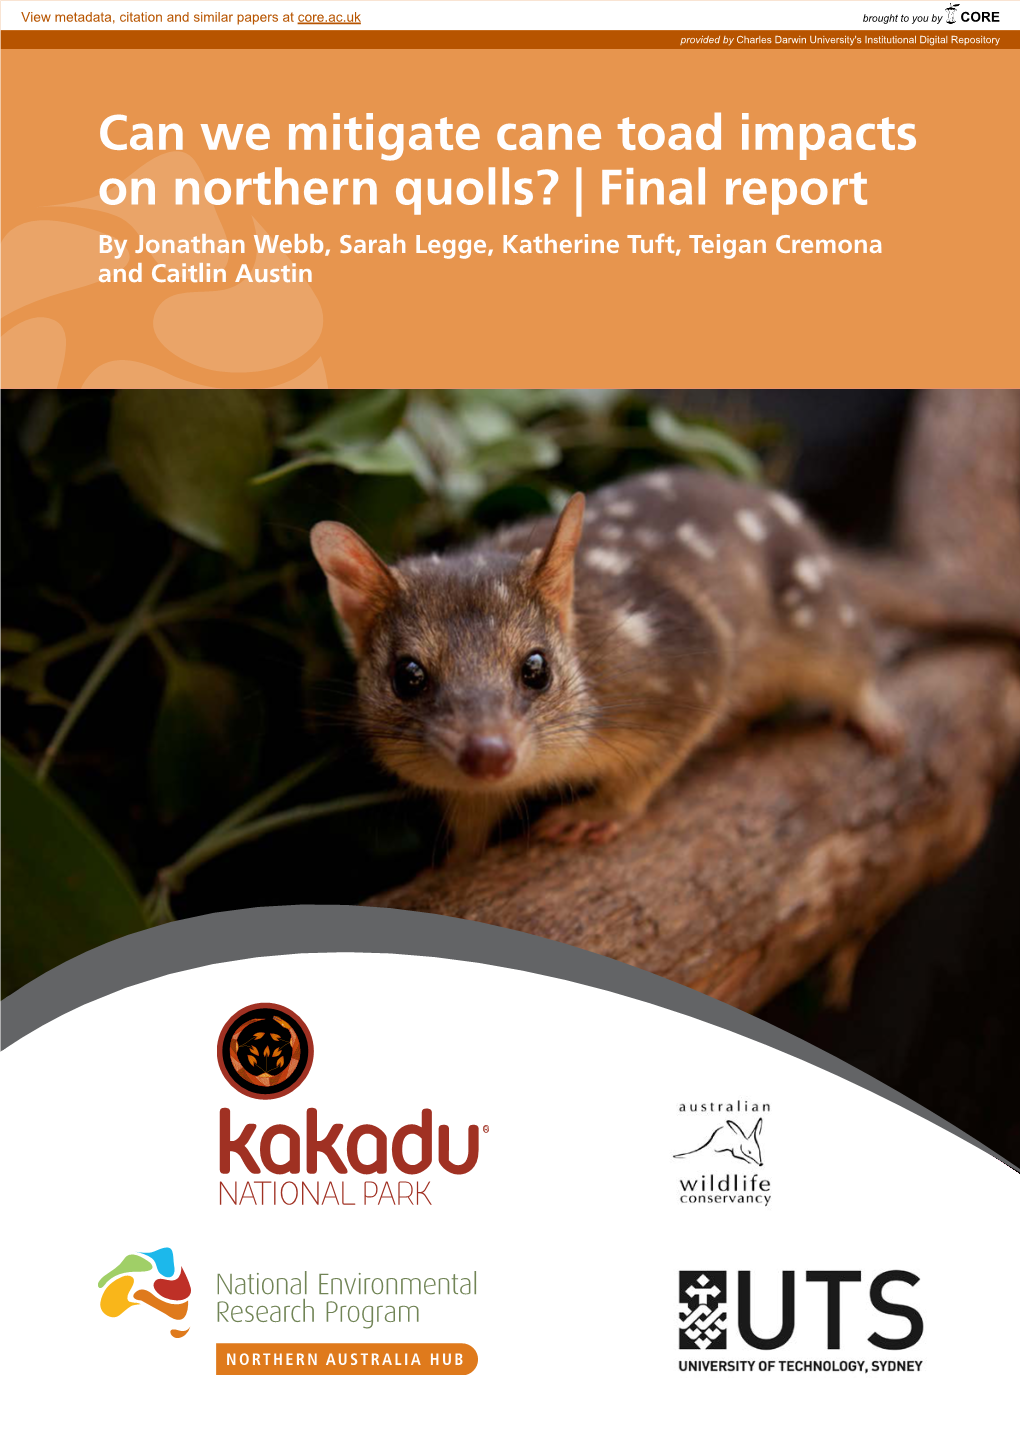 Can We Mitigate Cane Toad Impacts on Northern Quolls? | Final Report by Jonathan Webb, Sarah Legge, Katherine Tuft, Teigan Cremona and Caitlin Austin